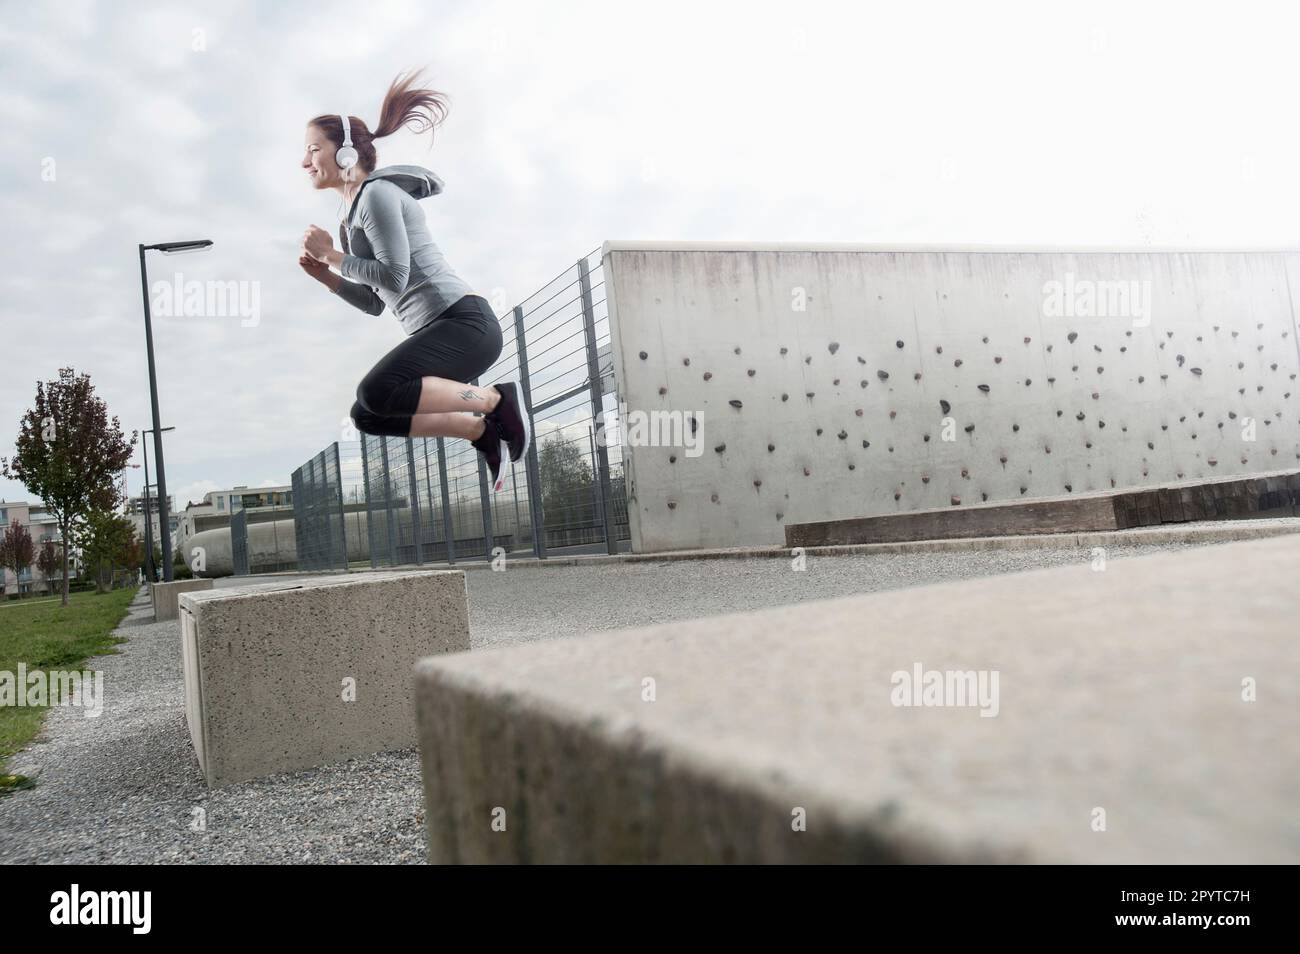 Young woman jumping on a concrete block and listening to music, Bavaria, Germany Stock Photo